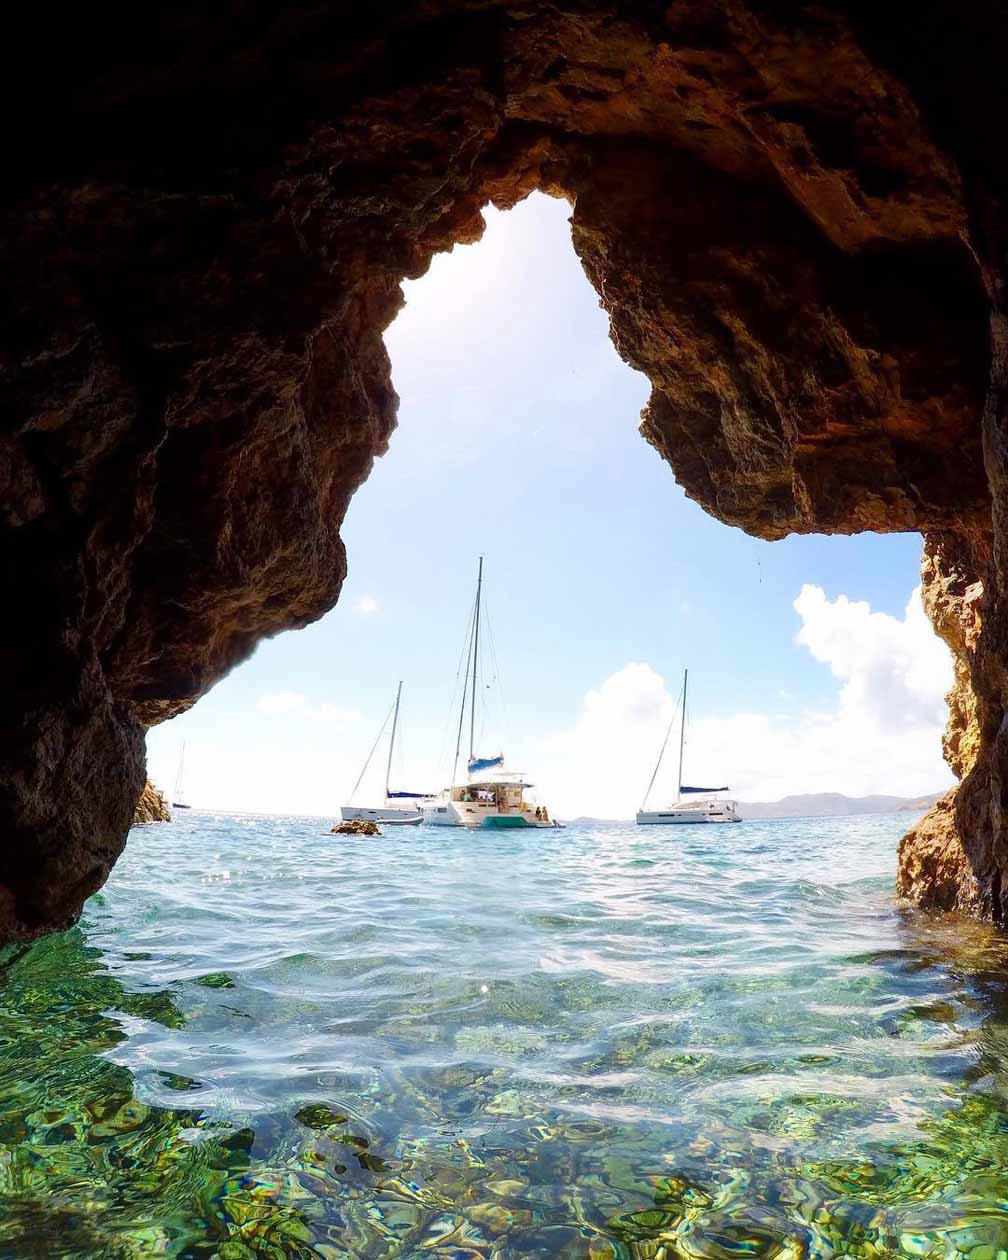 The Caves, Norman Island. Copyright © The British Virgin Islands Tourist Board & Film Commission